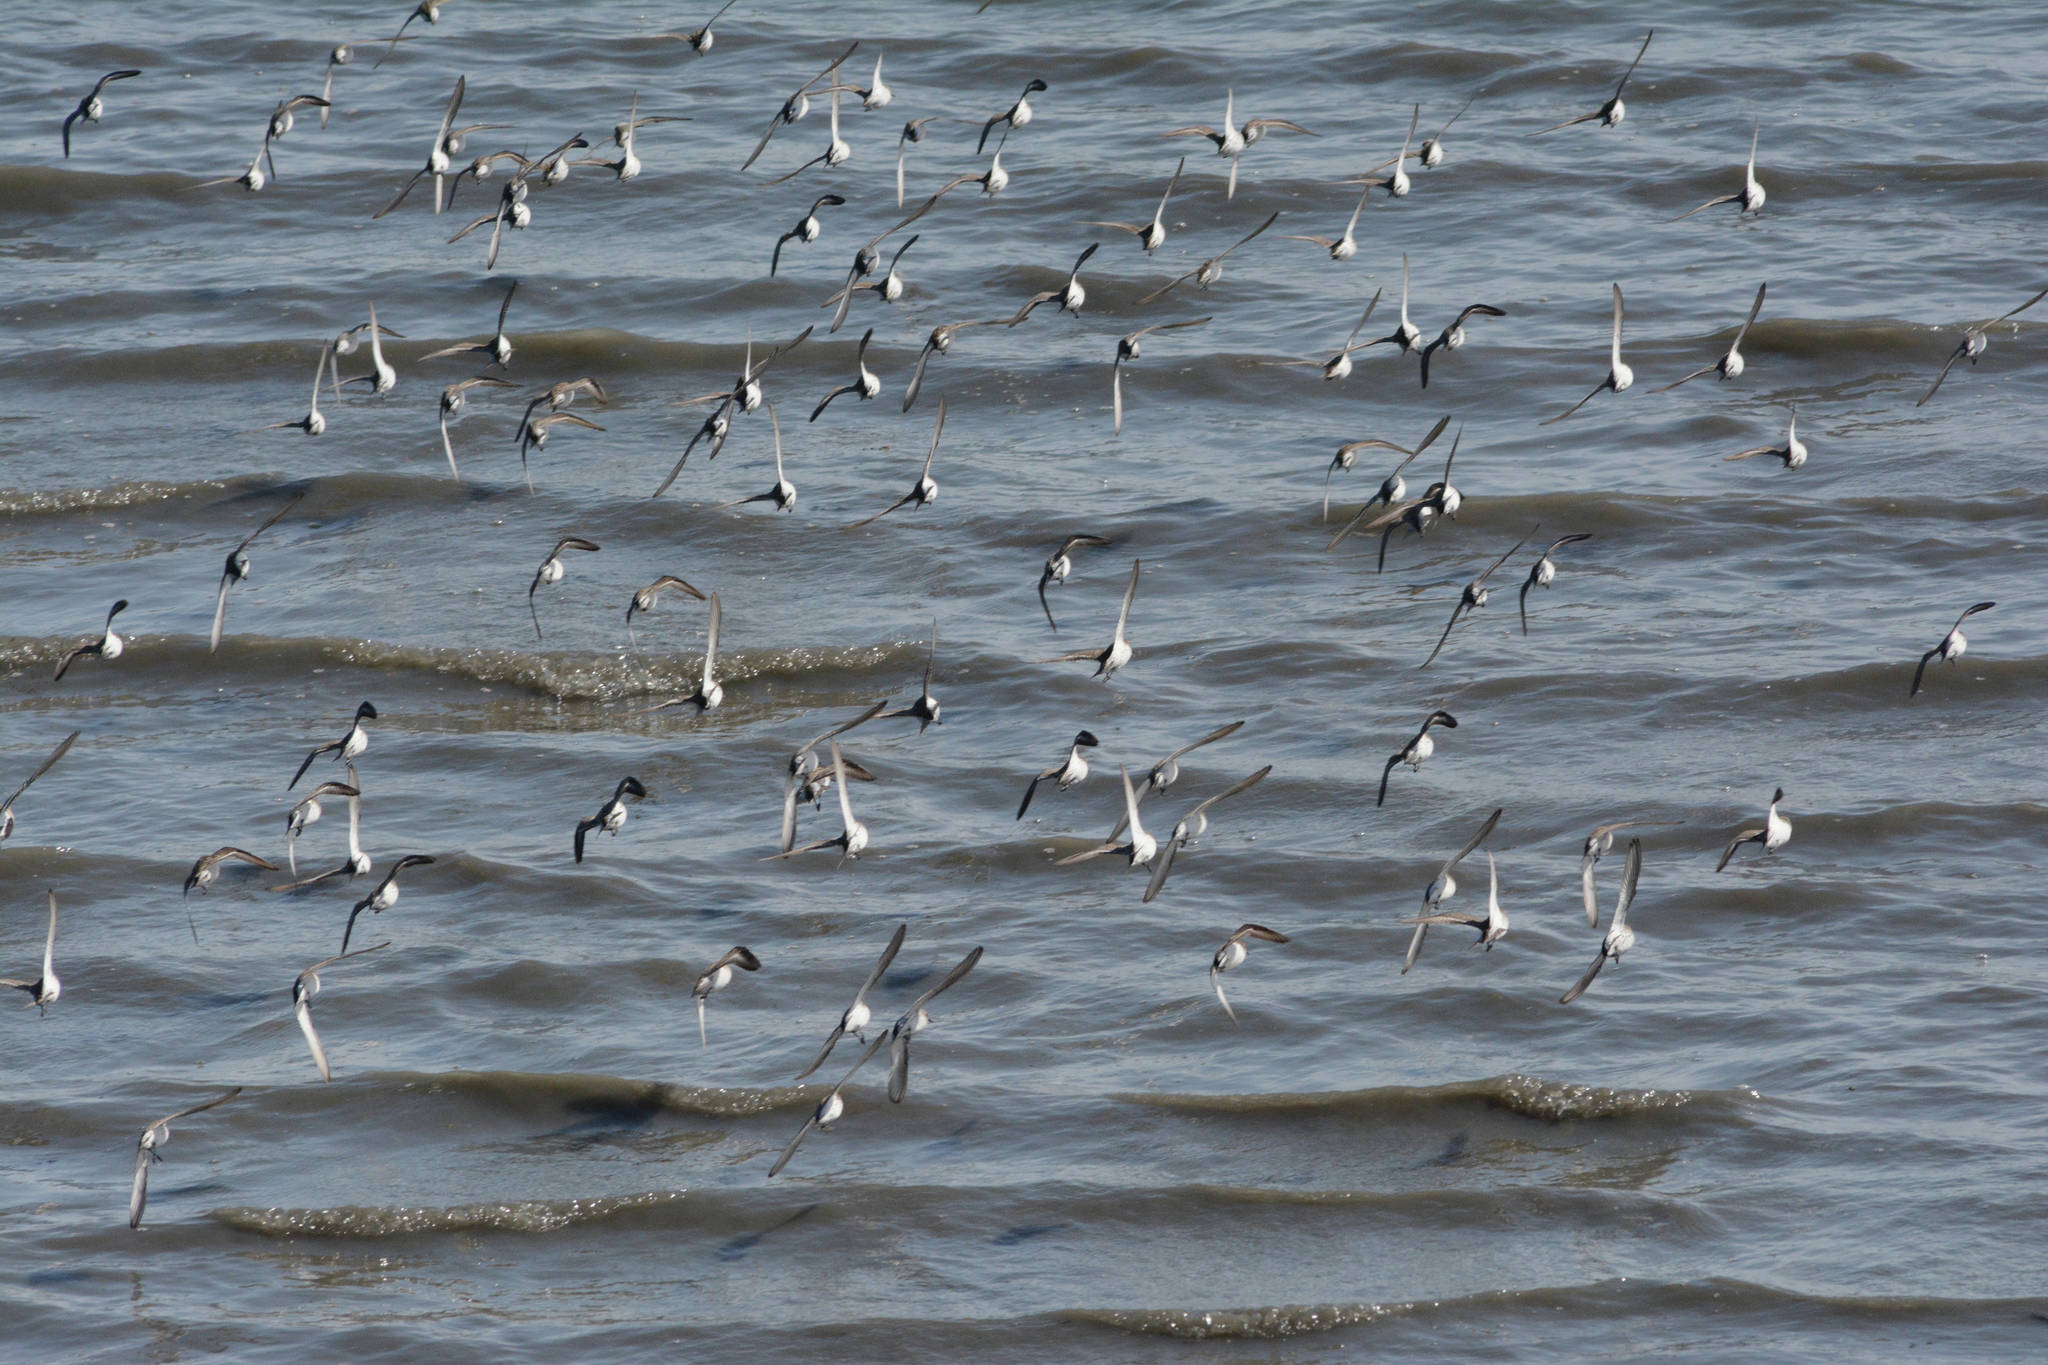 Shorebirds fly over Mud Bay on Friday, May 7, 2021, in Homer, Alaska. (Photo by Michael Armstrong/Homer News)